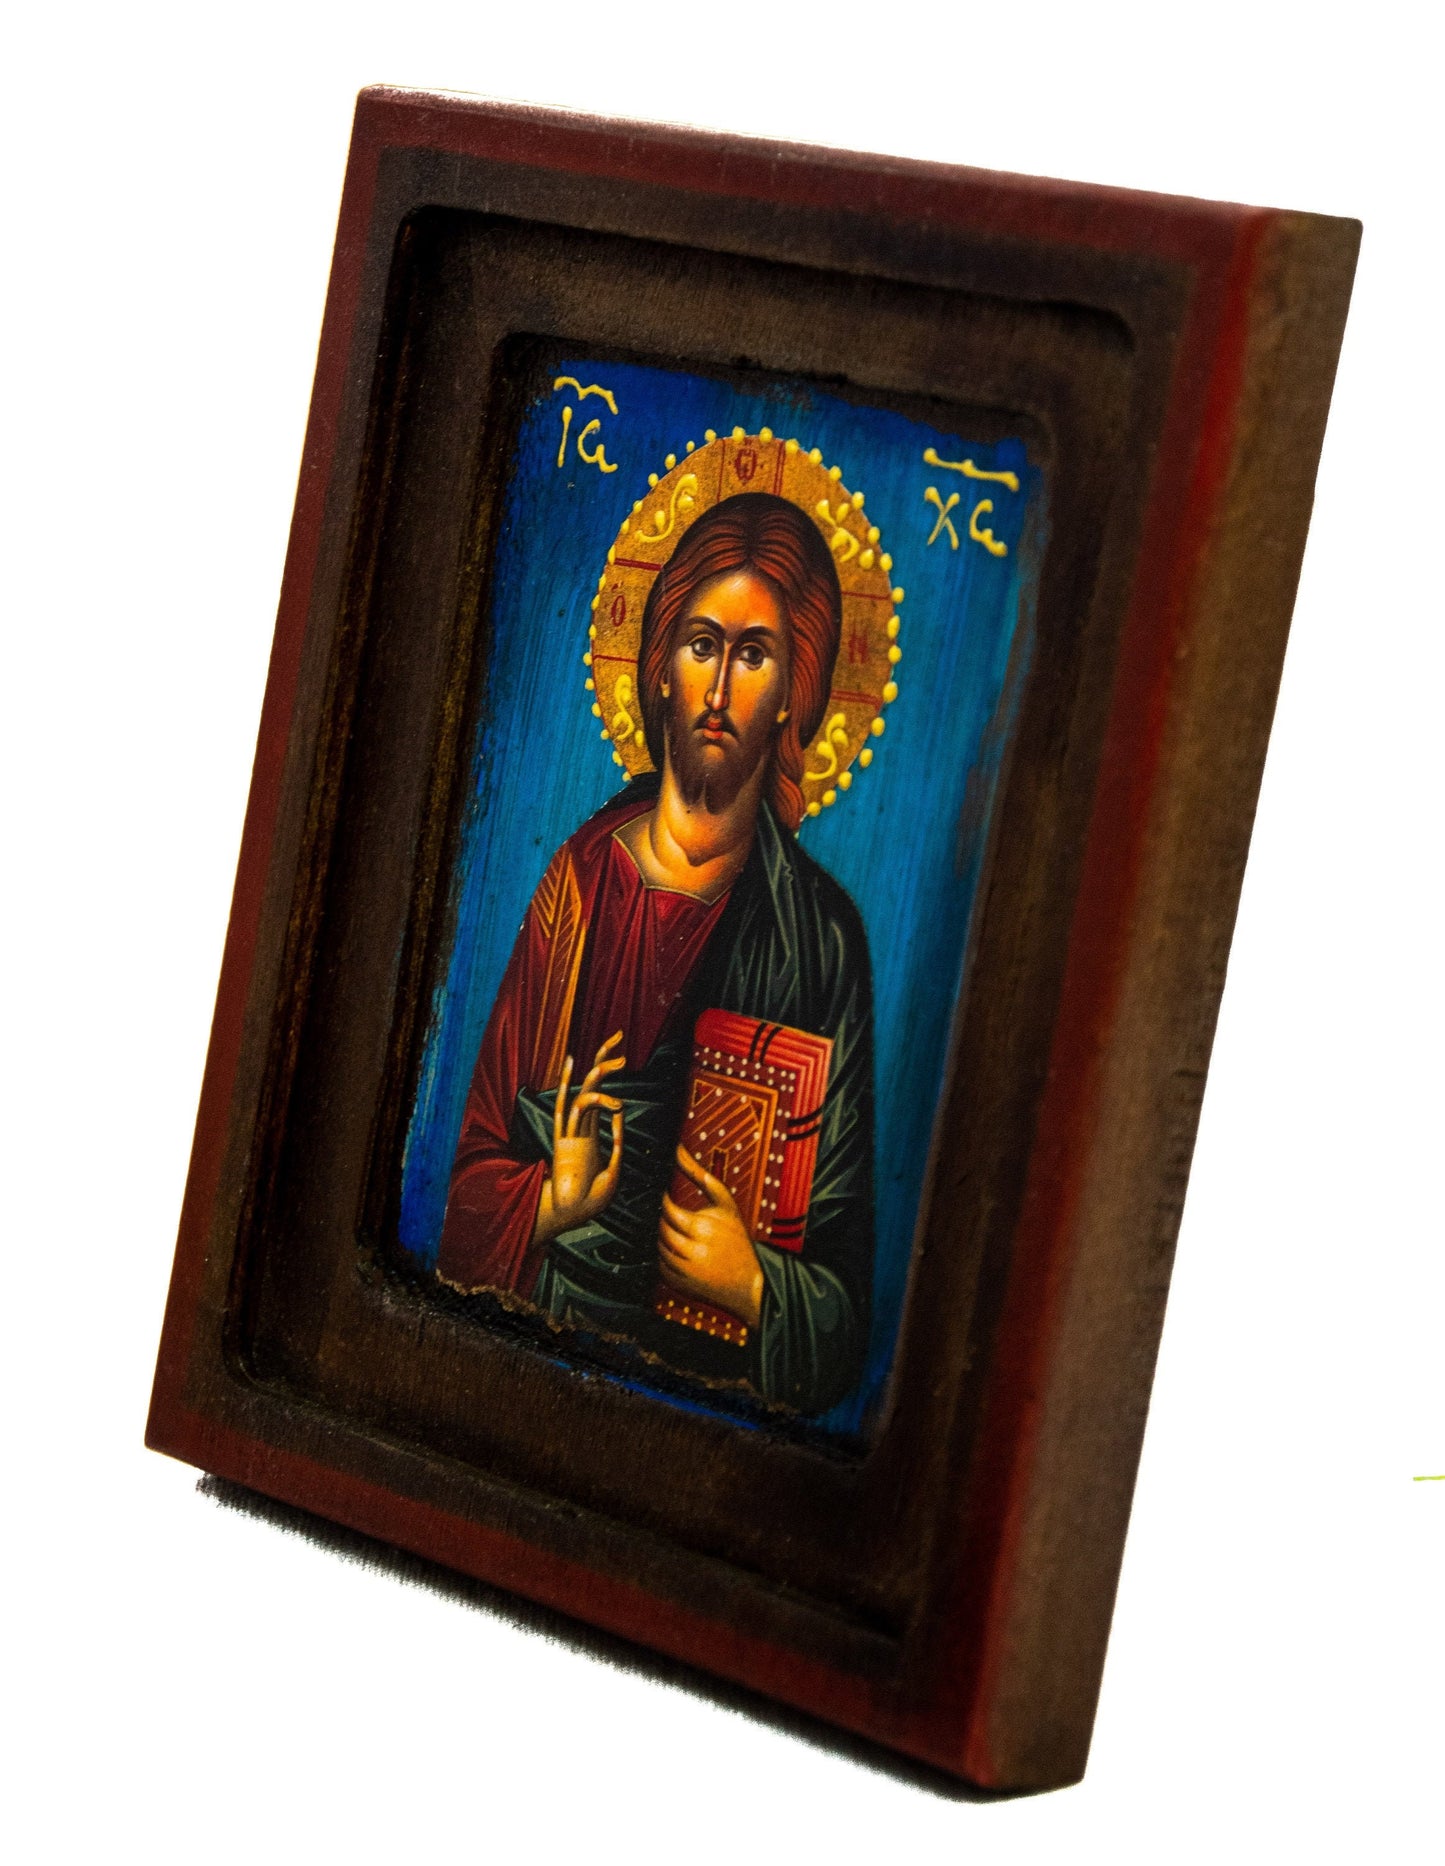 Jesus Christ icon, Handmade Greek Orthodox icon, Byzantine art wall hanging icon of our Lord on wood plaque, religious decor 19x15cm TheHolyArt